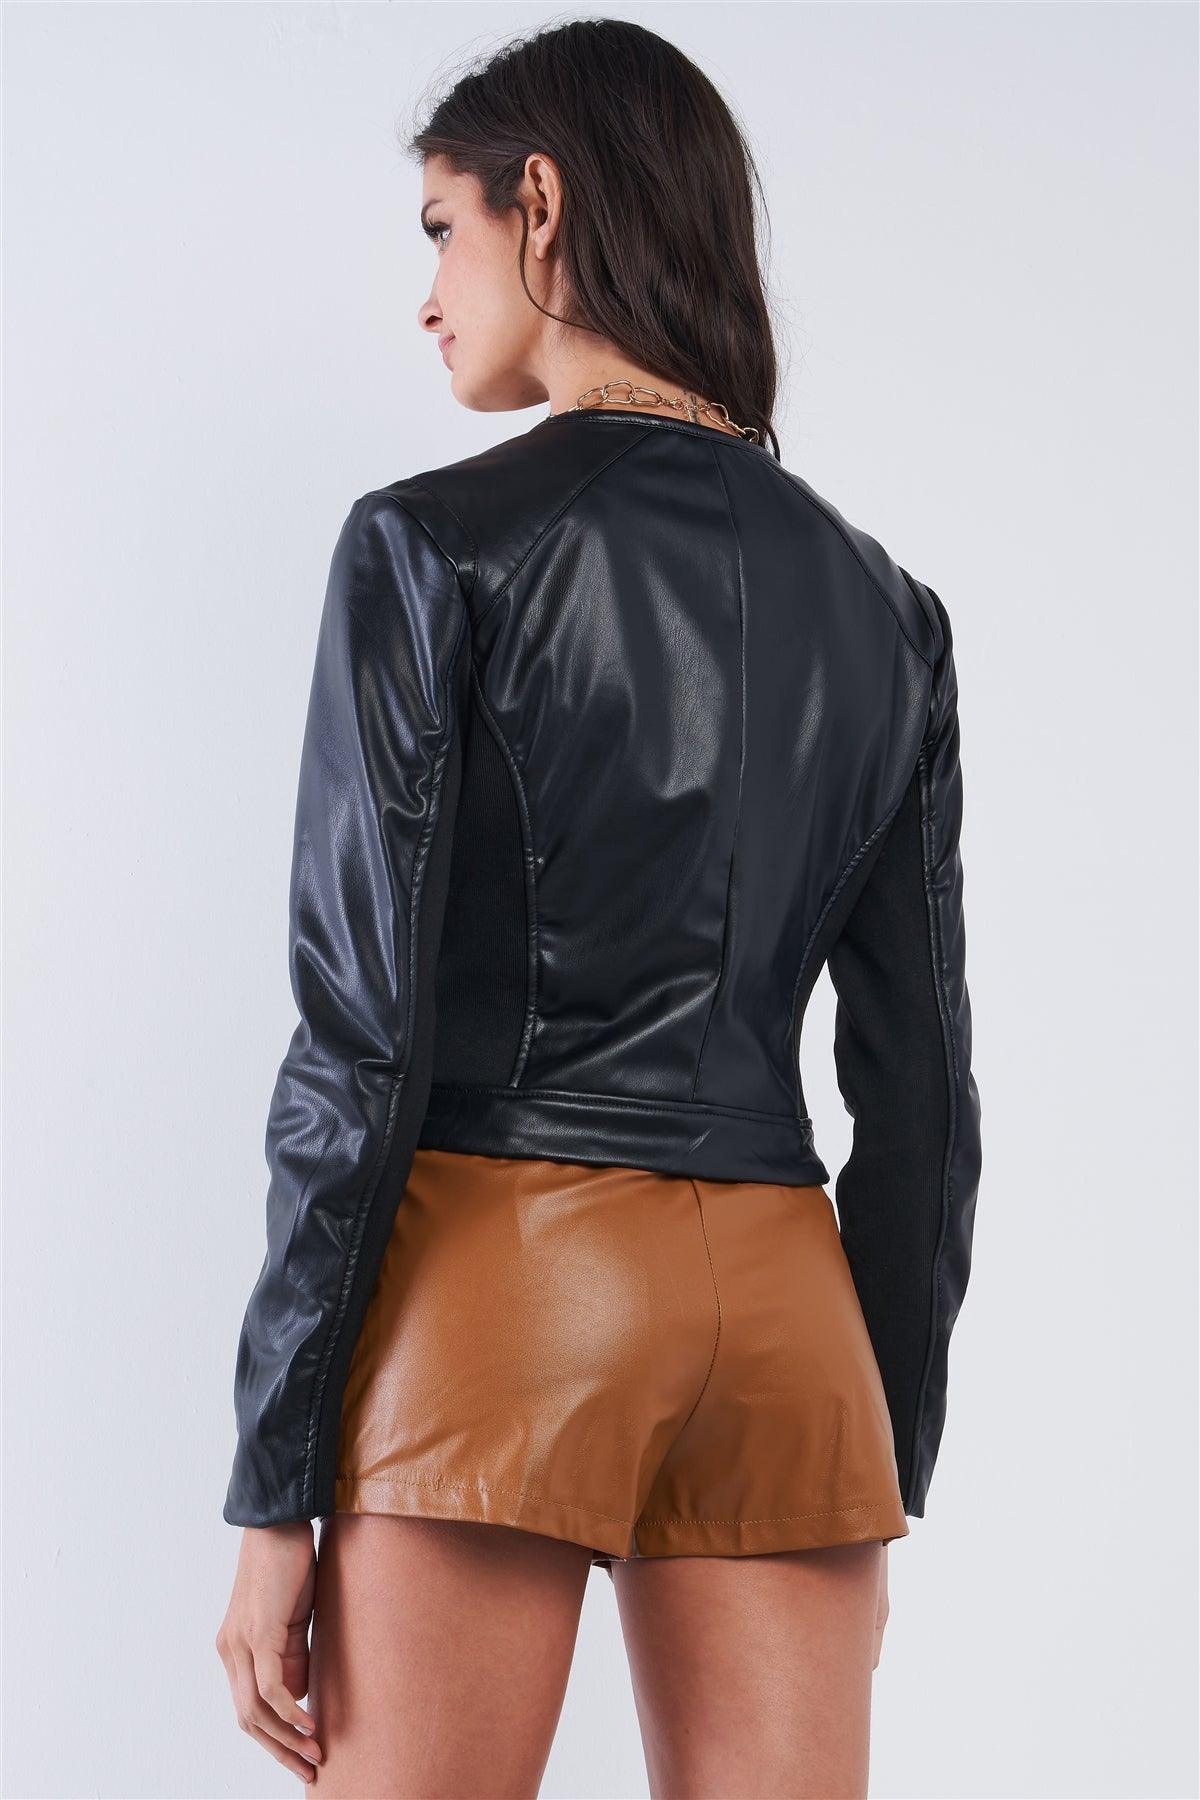 Simple Black Vegan Leather Crew Neck Centered Zipper Closure Jacket With Front Zipper Pockets /2-2-2